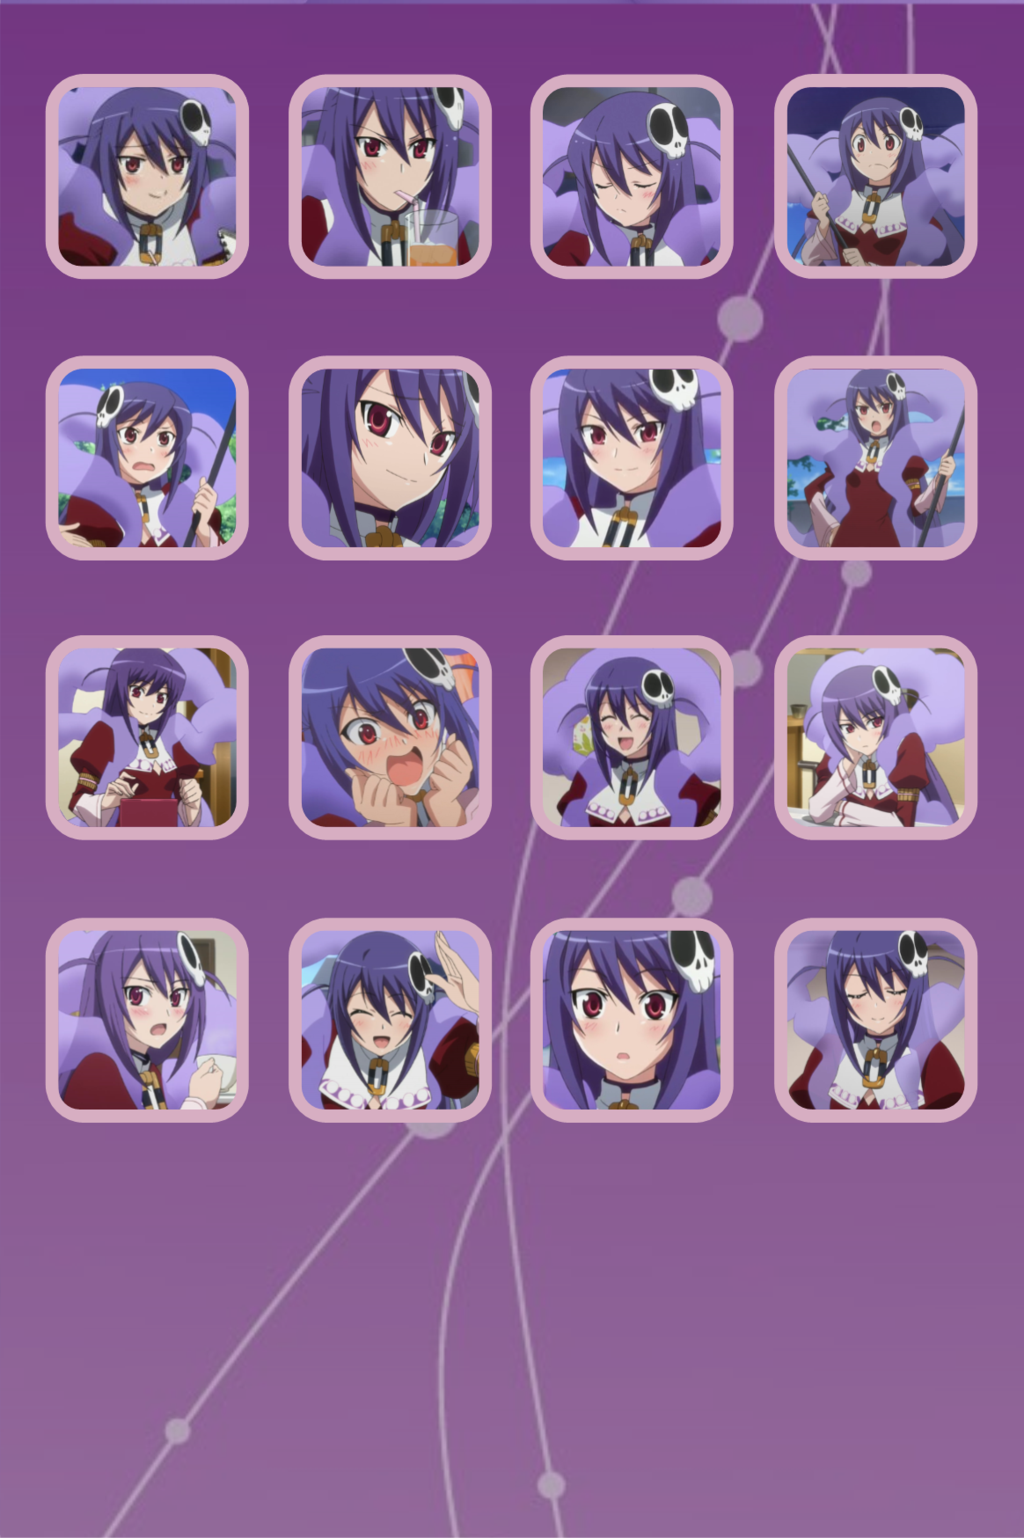 The world god only knows - Haqua Ipod wallpaper by QuarianDerpy on ...